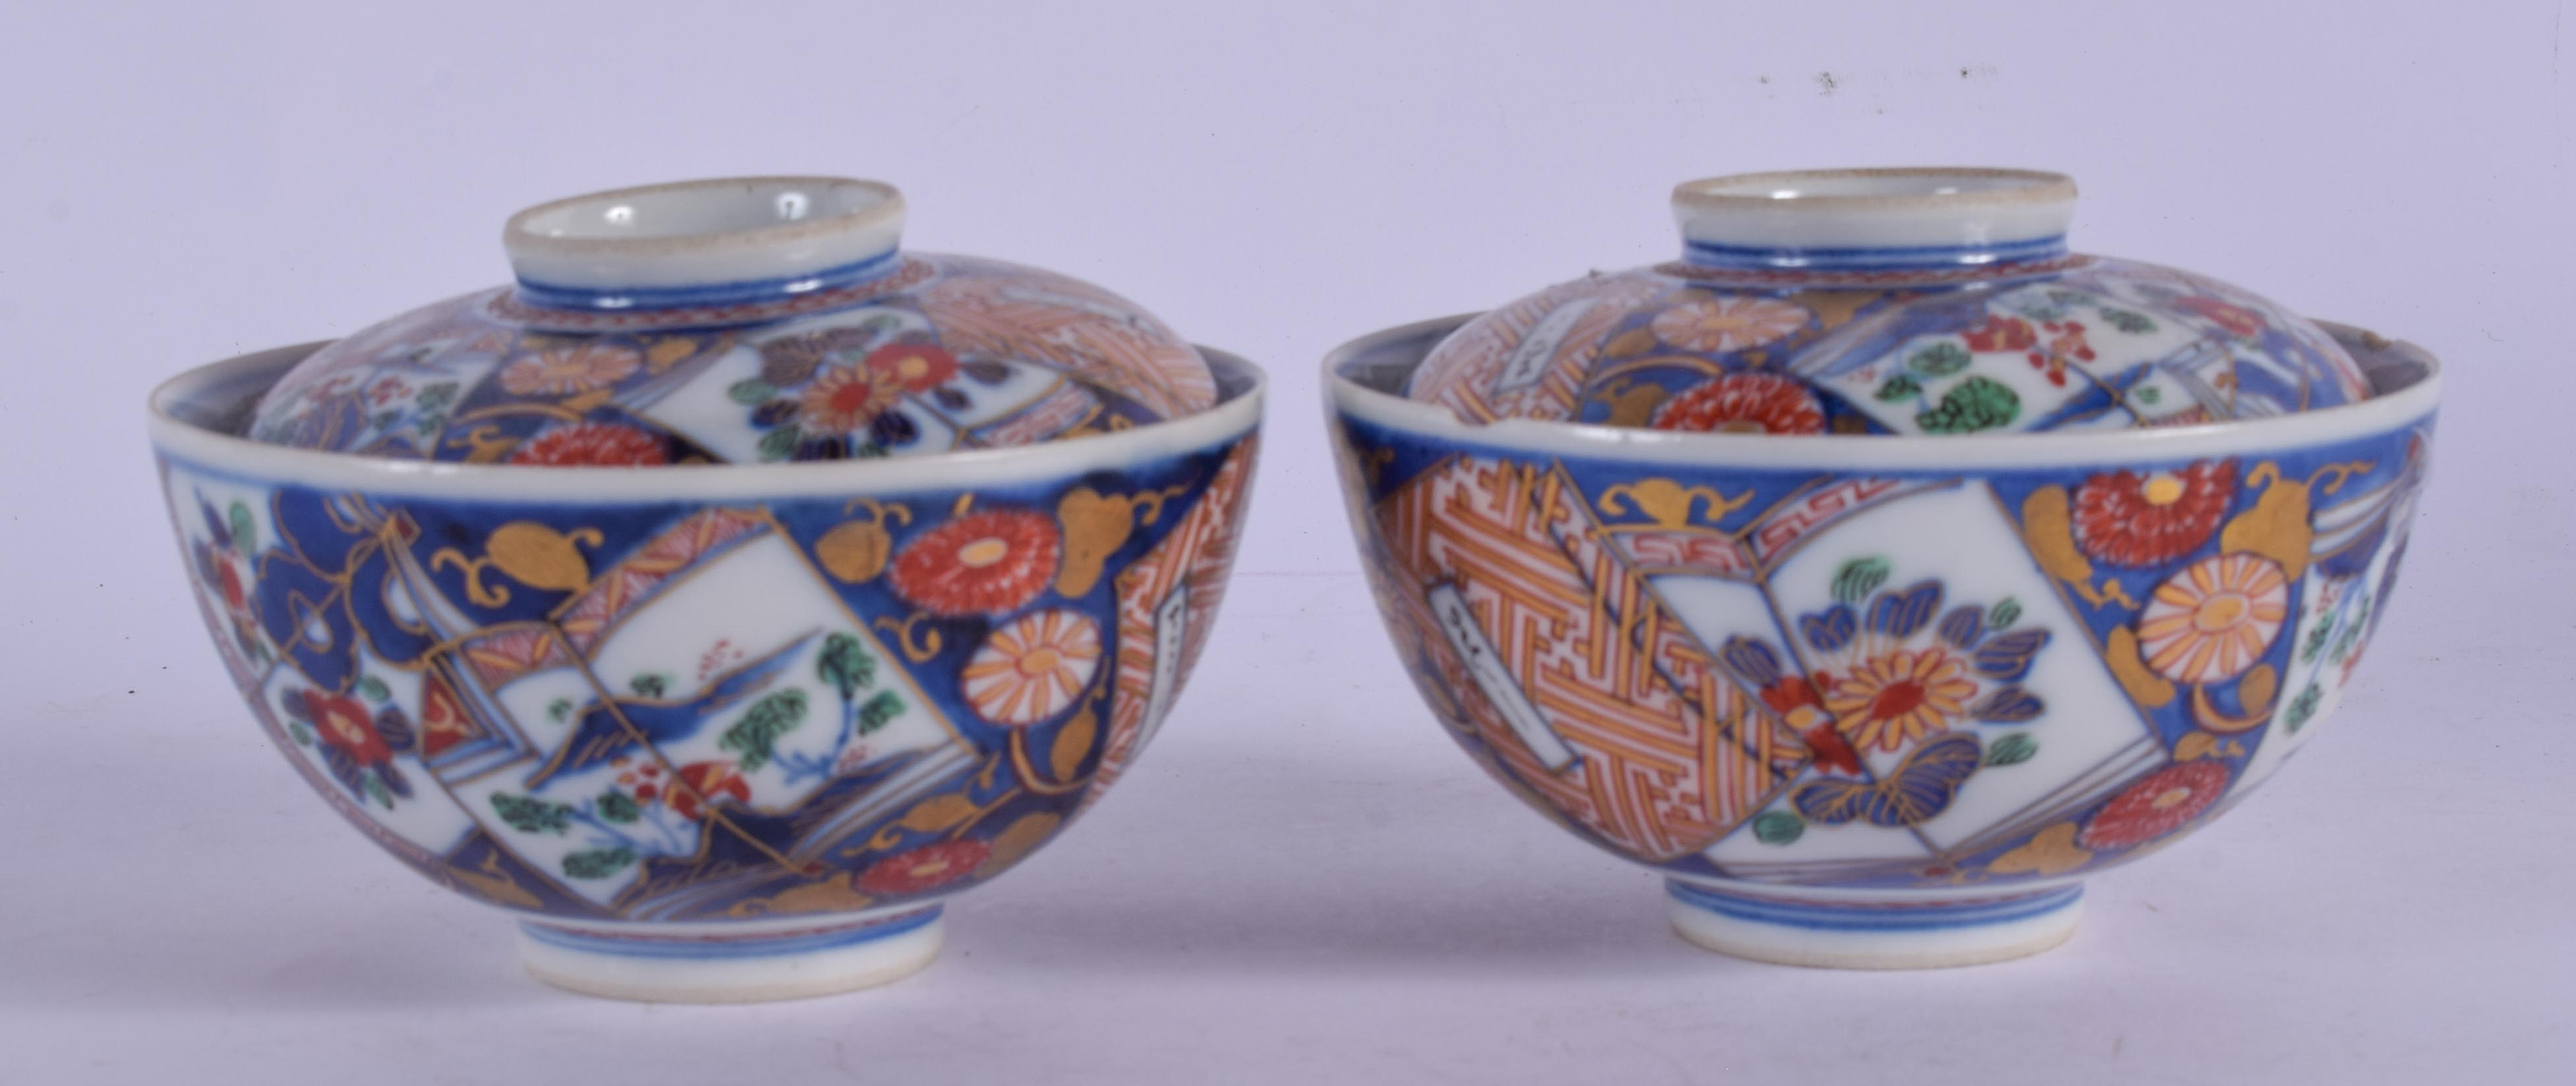 A PAIR OF 19TH CENTURY JAPANESE MEIJI PERIOD IMARI BOWLS AND COVERS painted with floral sprays. 10 c - Image 2 of 4